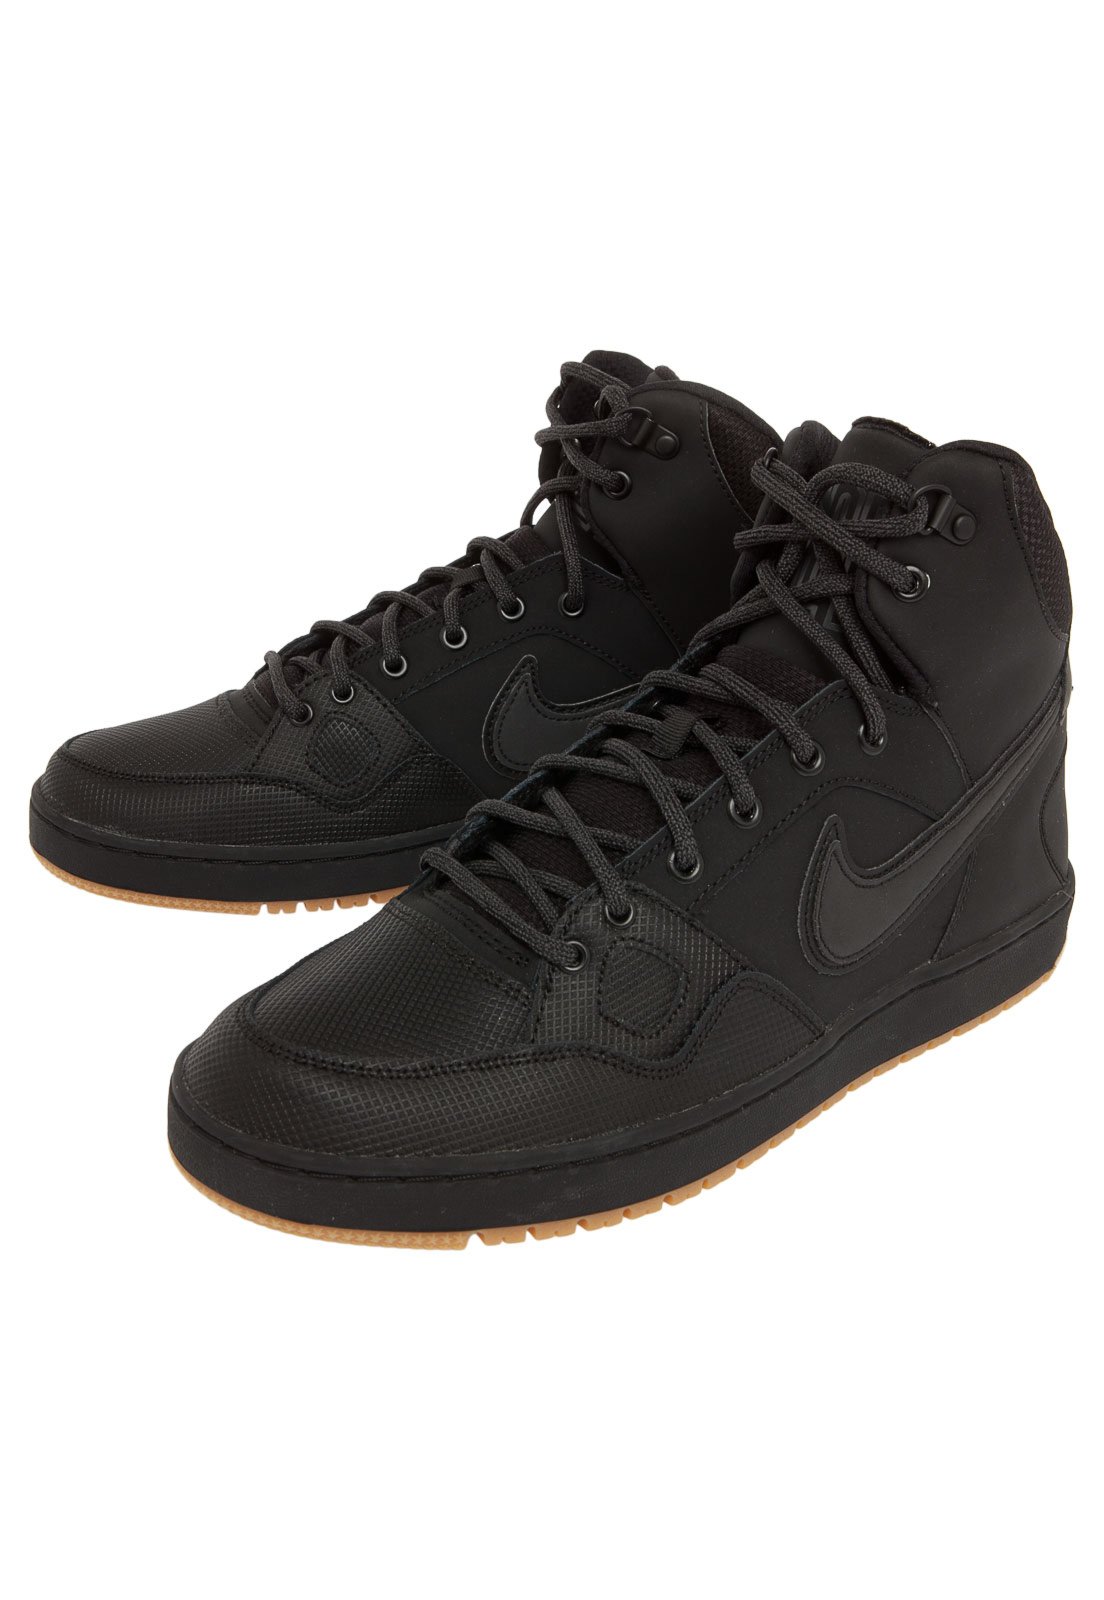 nike son force mid